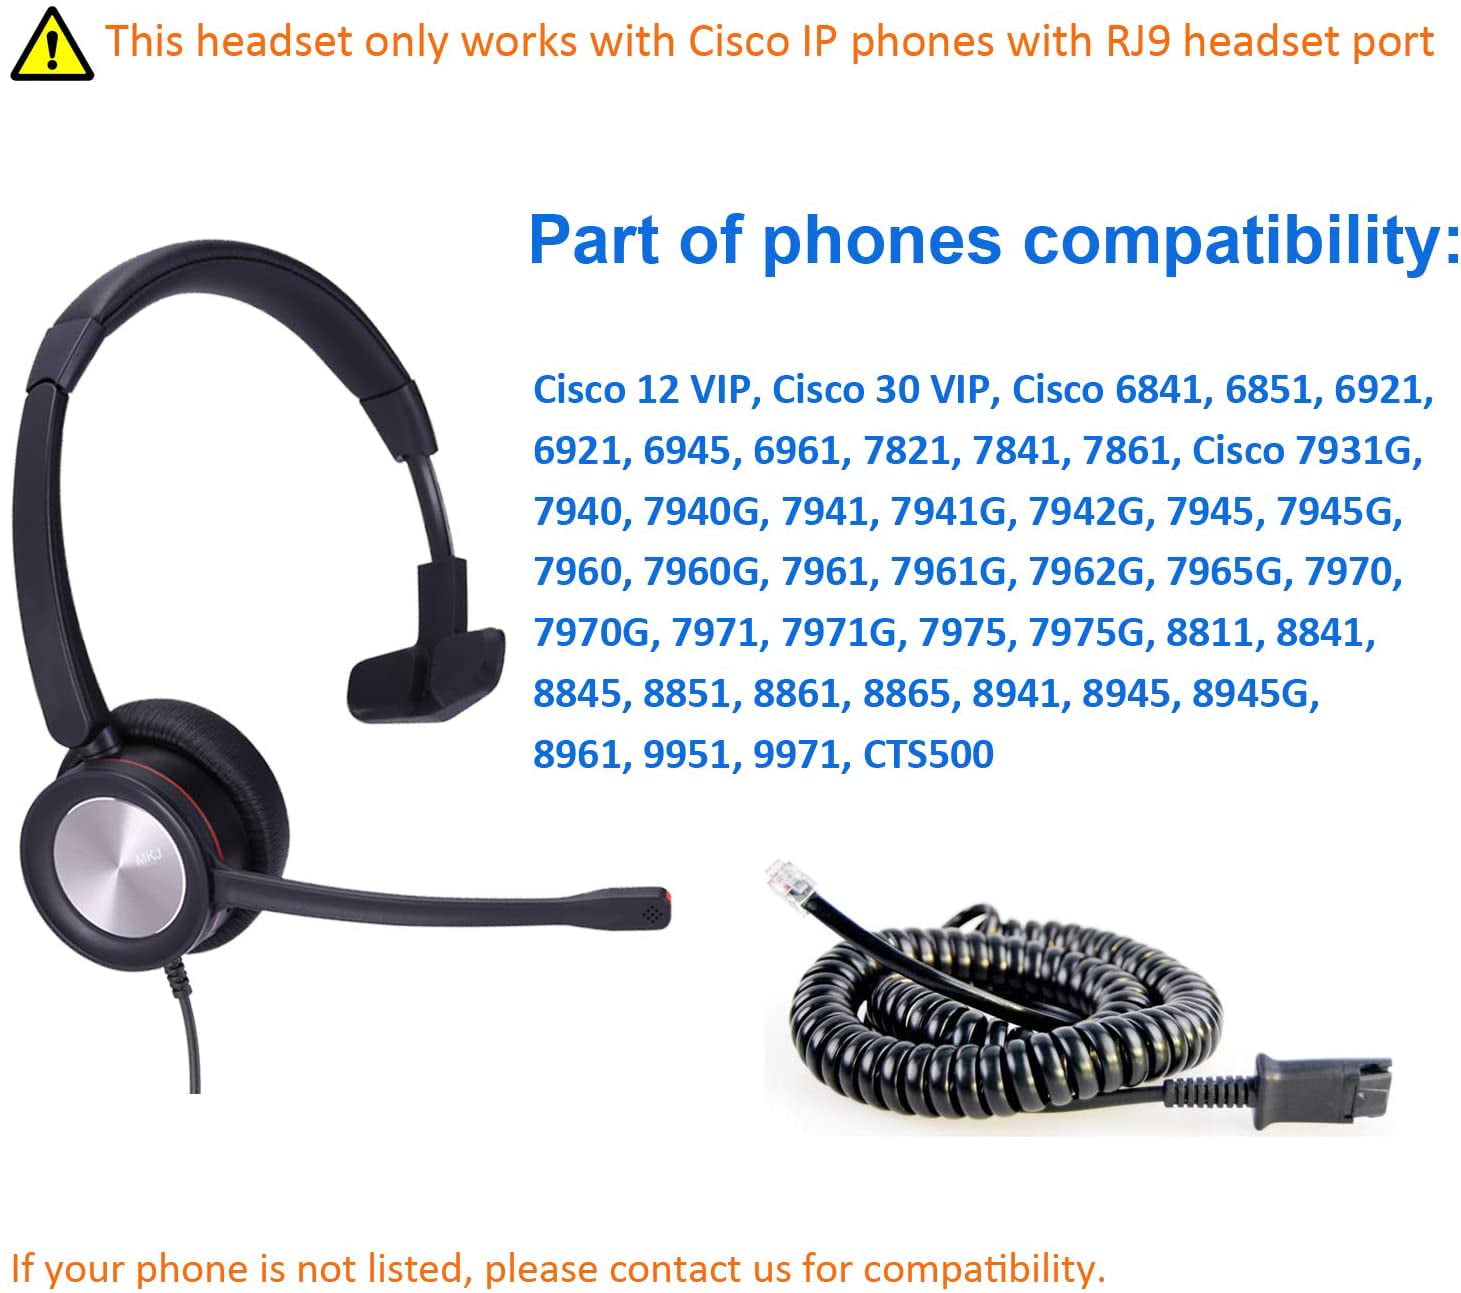 MKJ Office Headset for Cisco Phones Corded RJ9 Telephone Headset with Noise Cancelling Microphone for Cisco CP-7821 7841 6945 7941G 7942G 7945G 7962G 7965G 7970 7971G 7975G 8841 8865 8851 9975 etc 